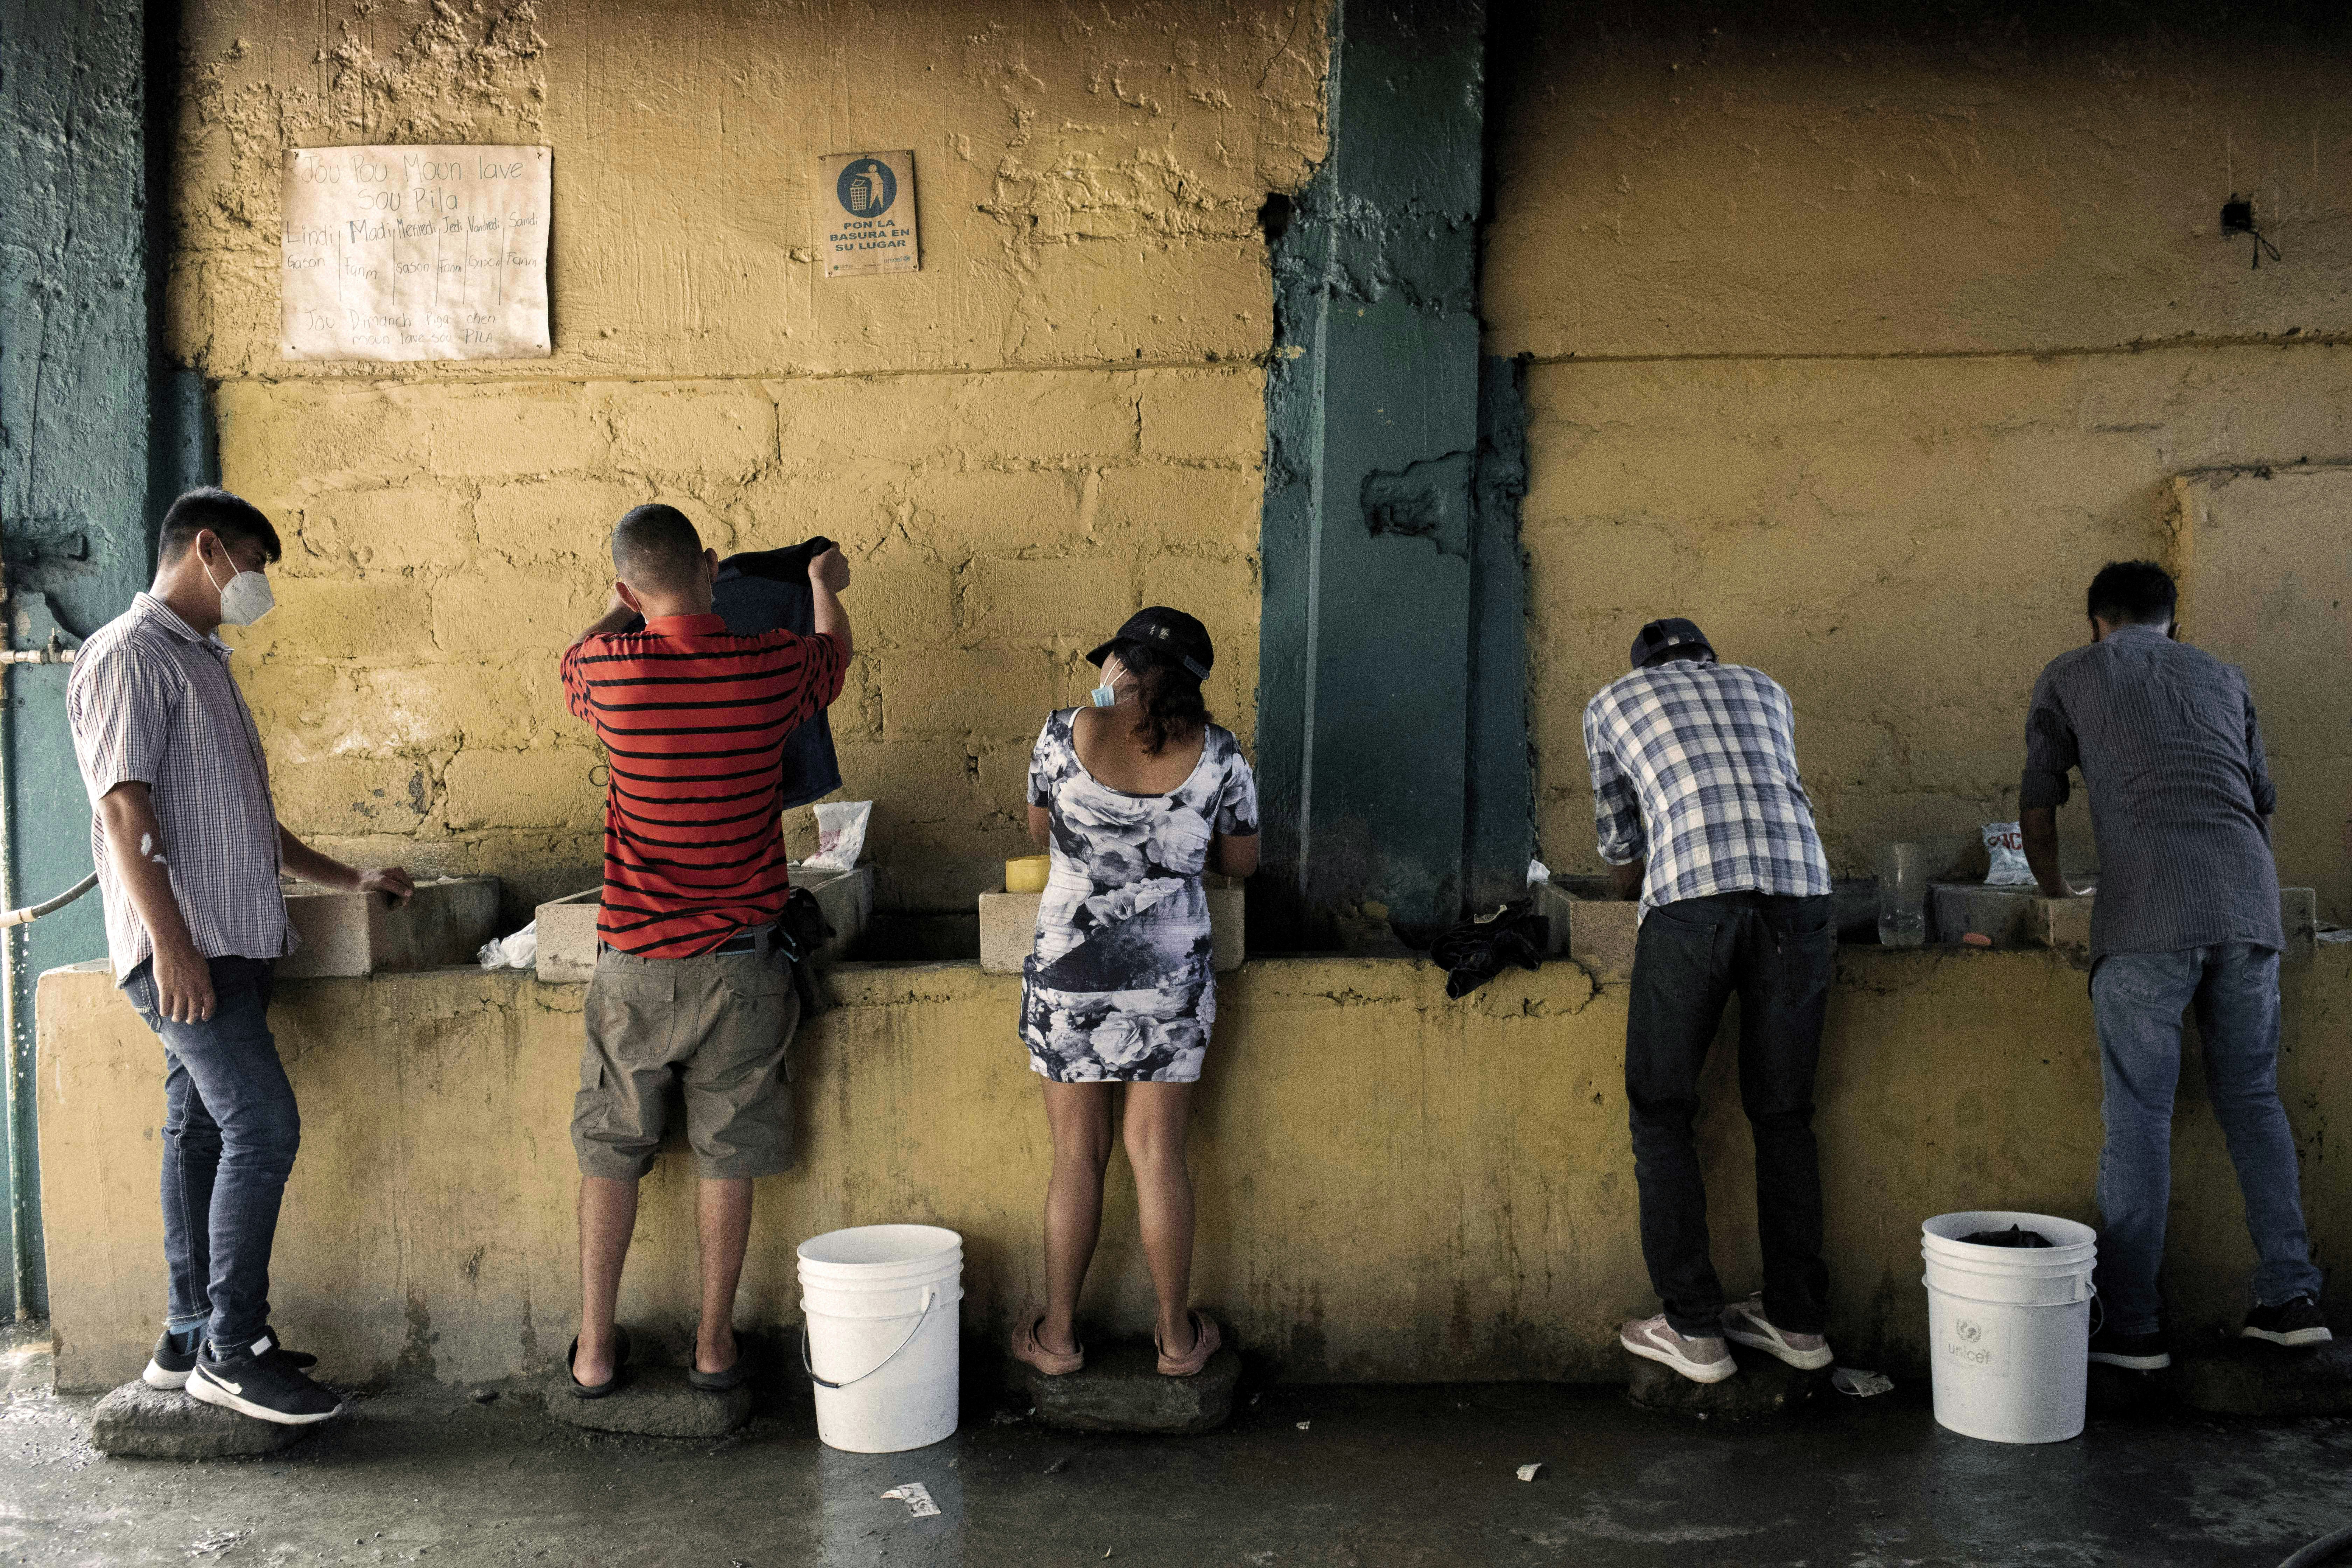 Migrants and asylum seekers wash clothing at a shelter in Tapachula, Chiapas state, Mexico, on Friday, Jan. 29, 2021. U.S. President Joe Biden and Mexican President Andres Manuel Lopez Obrador agreed to work together to stem the flow of irregular migration to their countries, the White House said. Photographer: Nicolo Filippo Rosso/Bloomberg via Getty Images